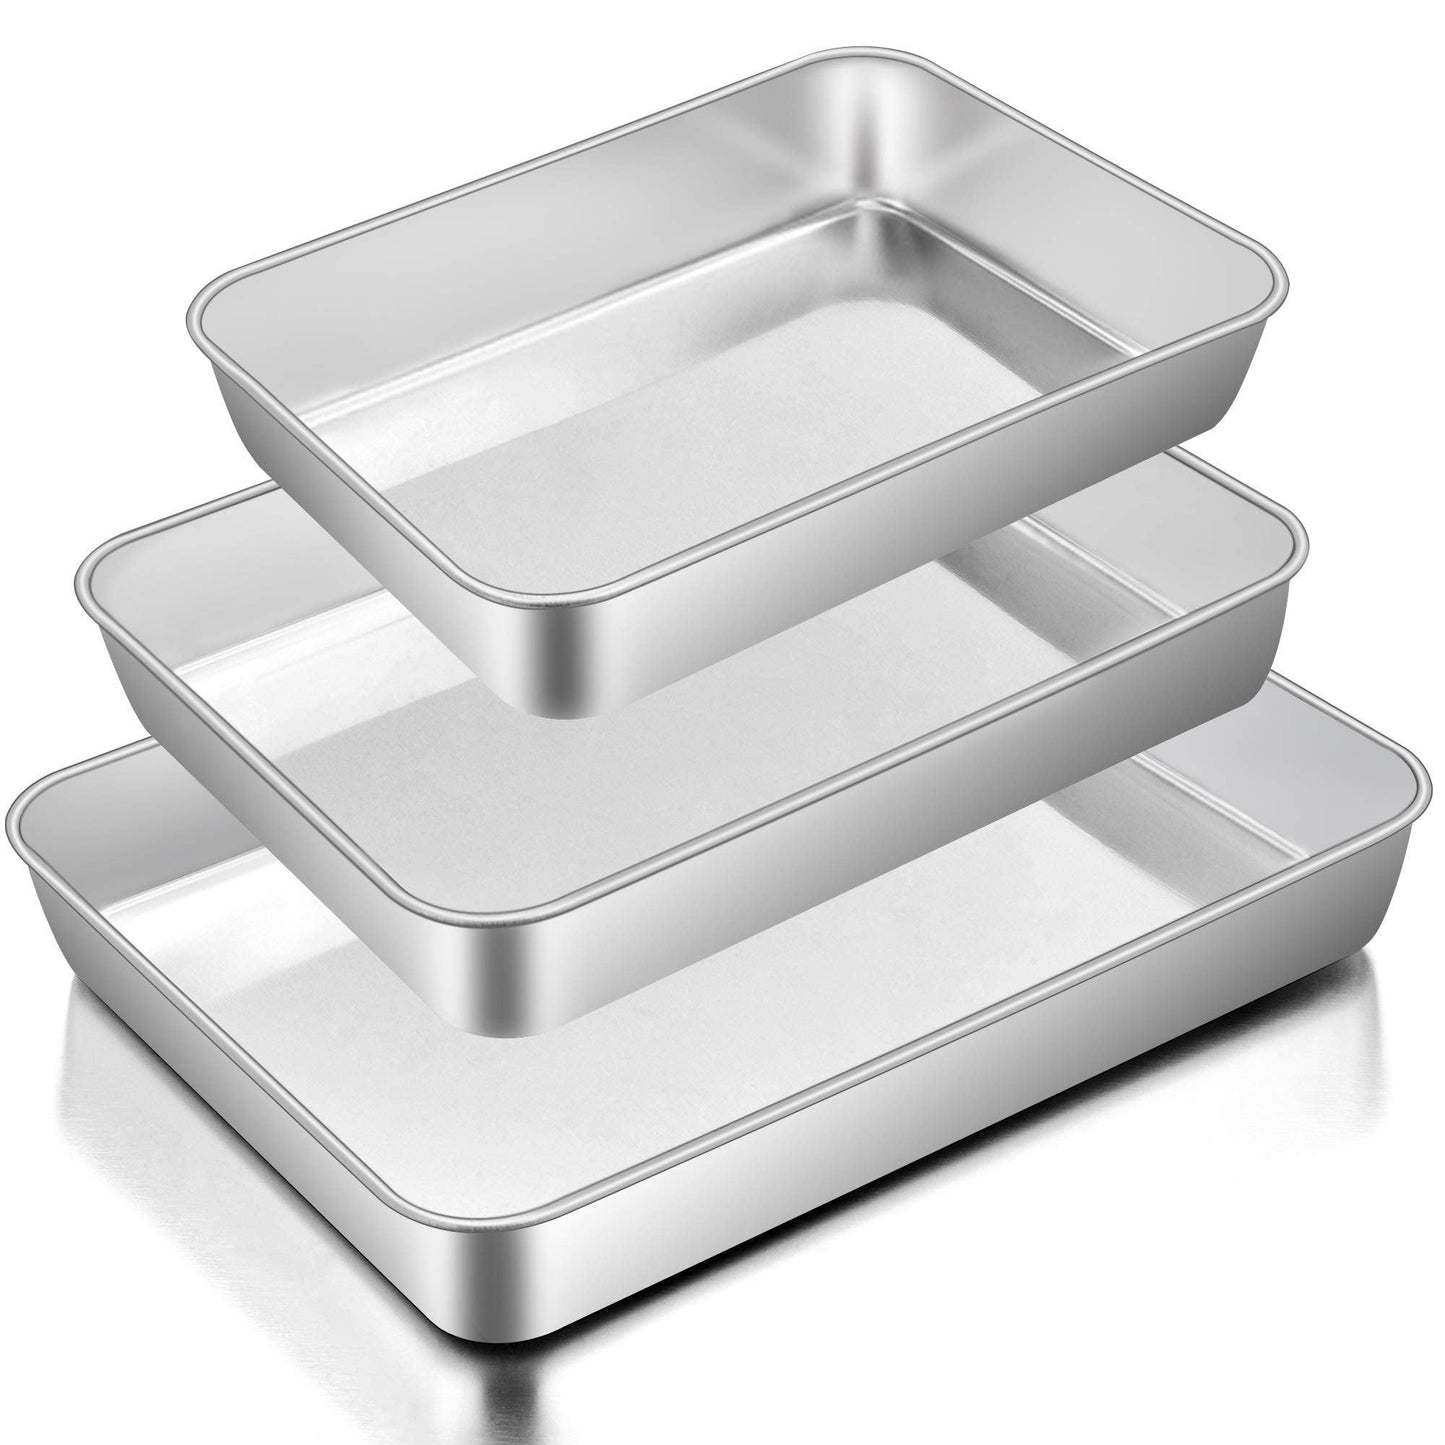 E-far Baking Pans Set of 3, Stainless Steel Sheet Cake Pan for Oven - 12.5/10.5/9.4Inch, Rectangle Bakeware Set for Cake Lasagna Brownie Casserole Cookie, Non-toxic & Healthy, Dishwasher Safe - CookCave